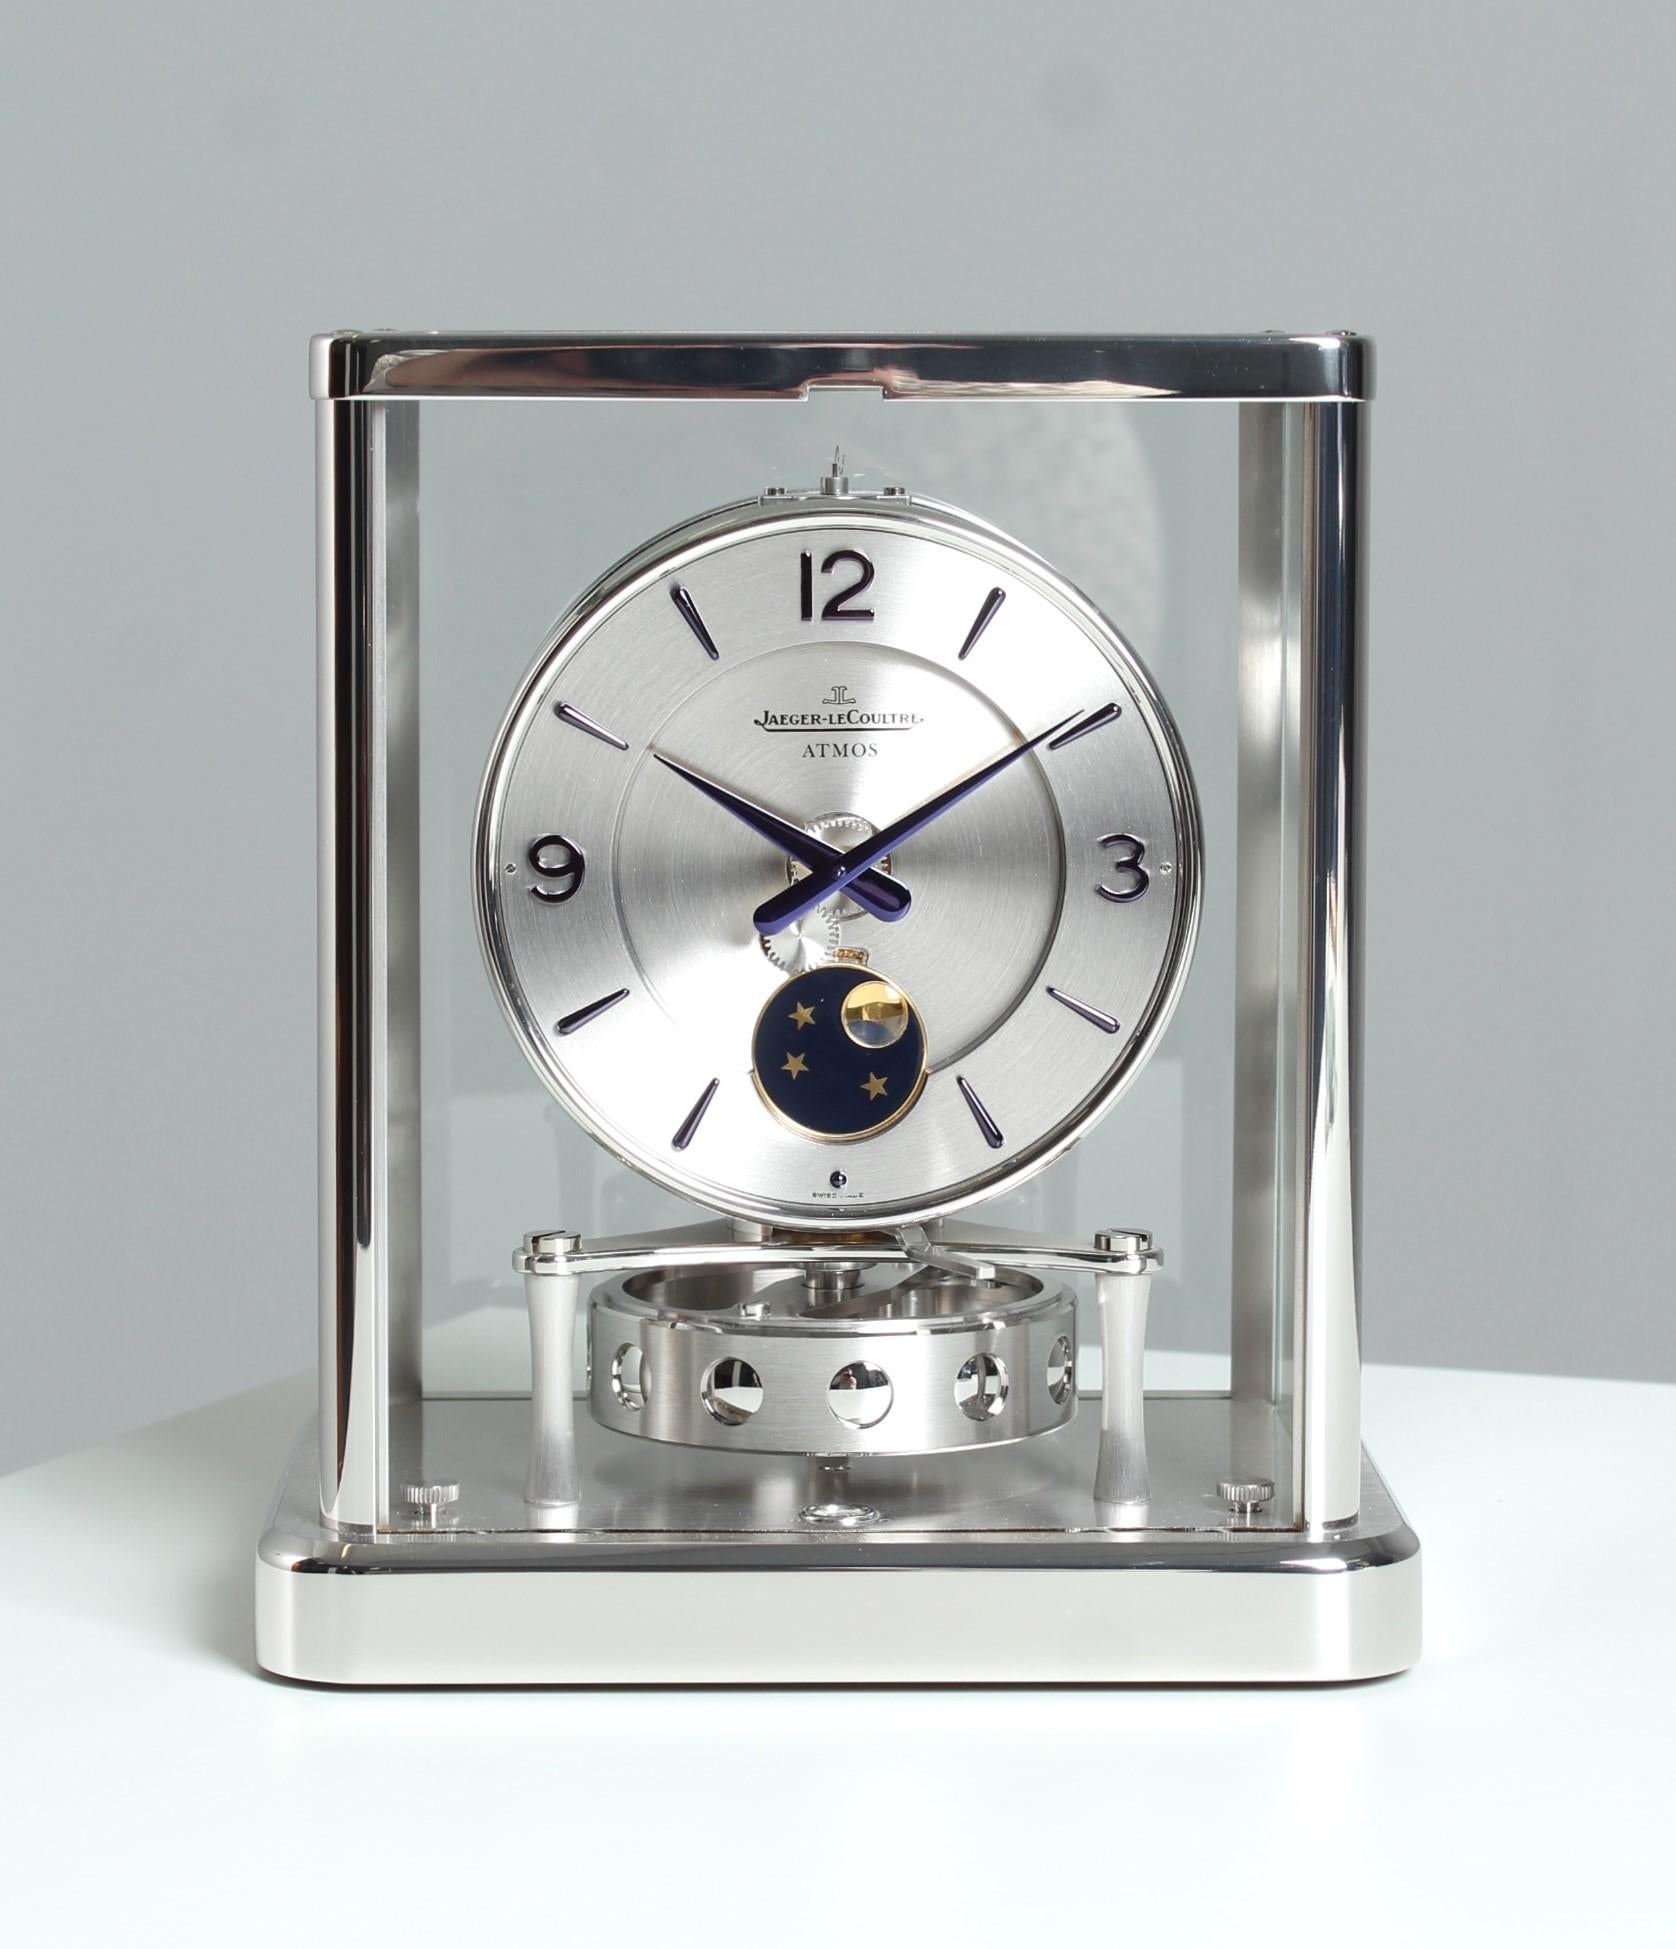 Swiss Jaeger LeCoultre, Atmos Clock with Moon Phase, Rhodium-plated with Wall Console